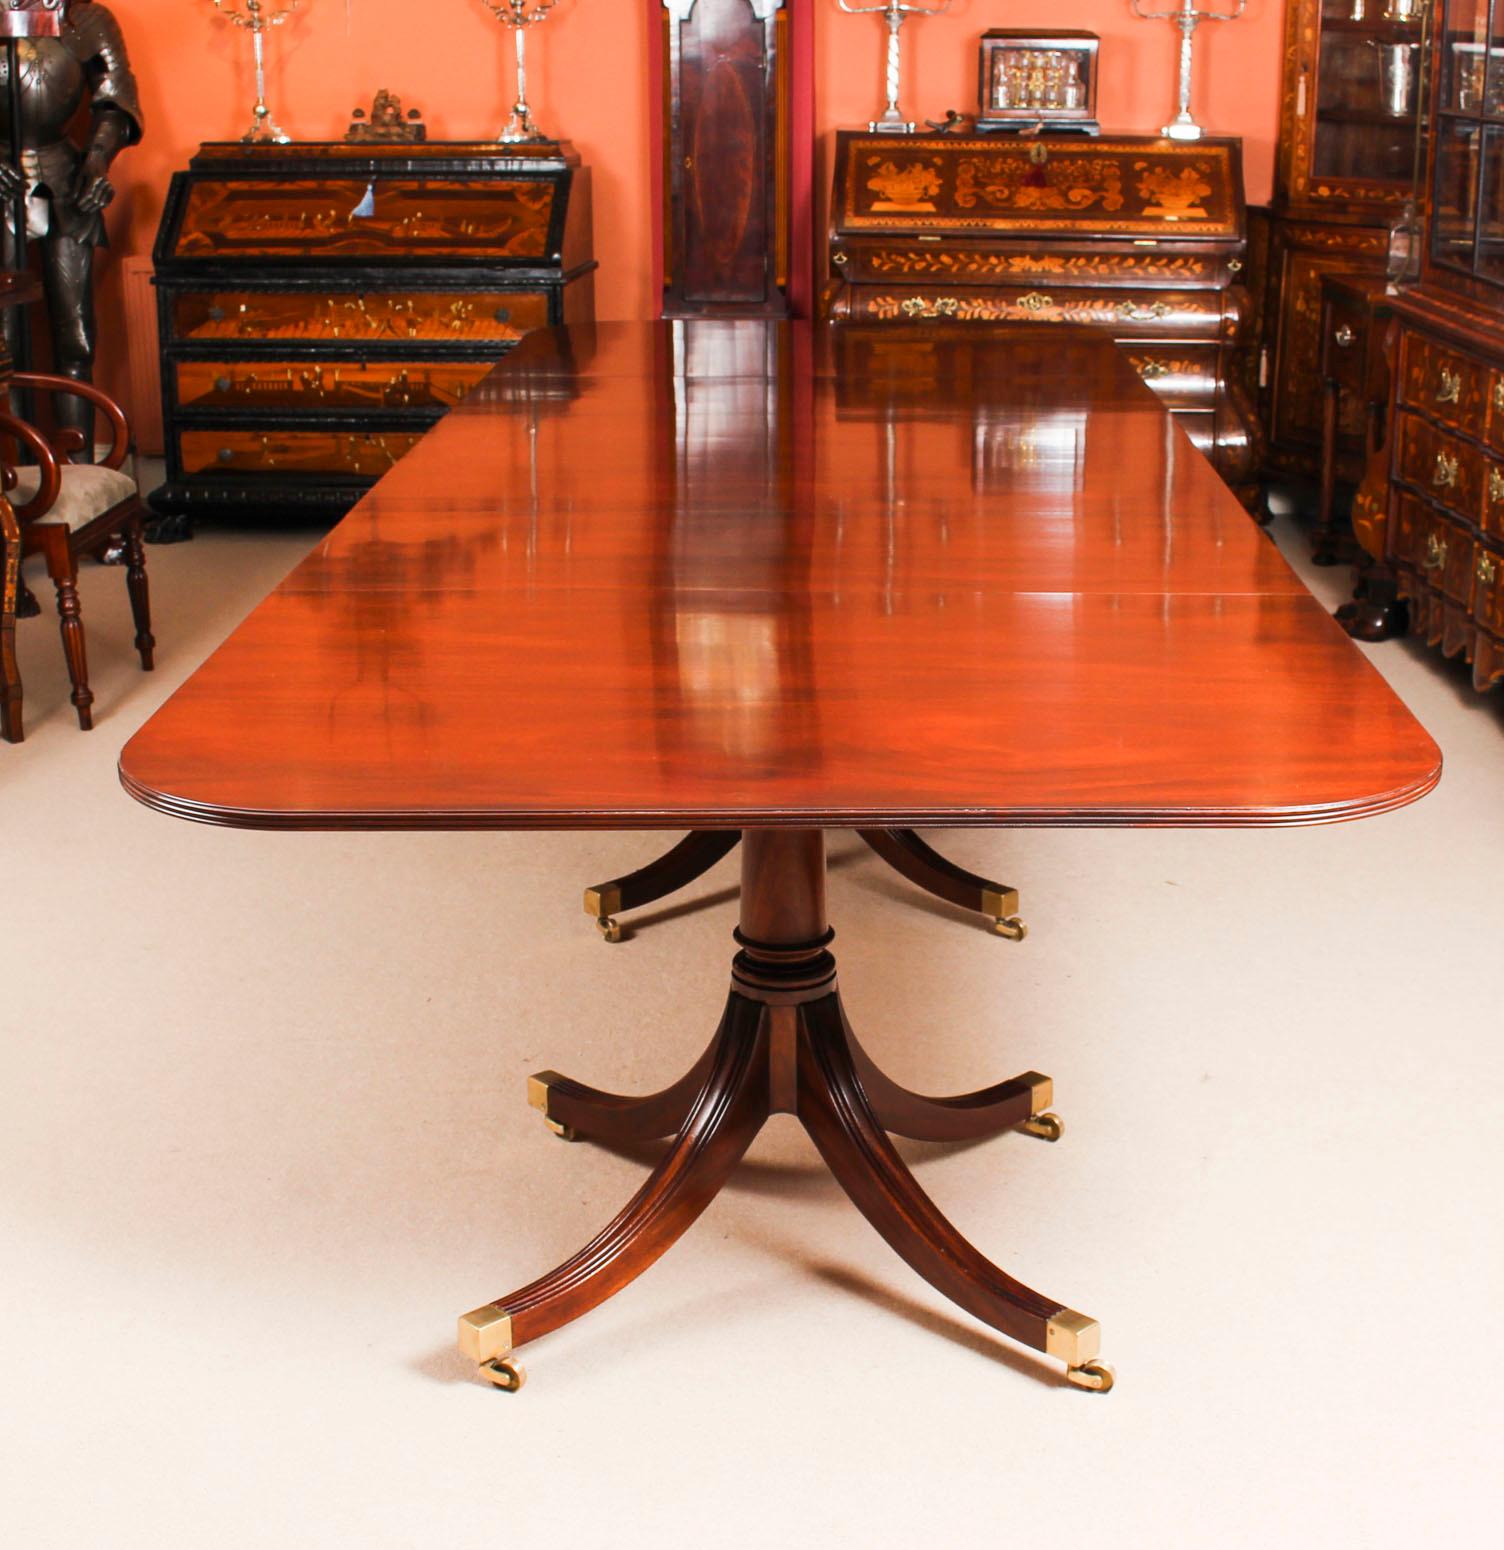 regency dining table and chairs